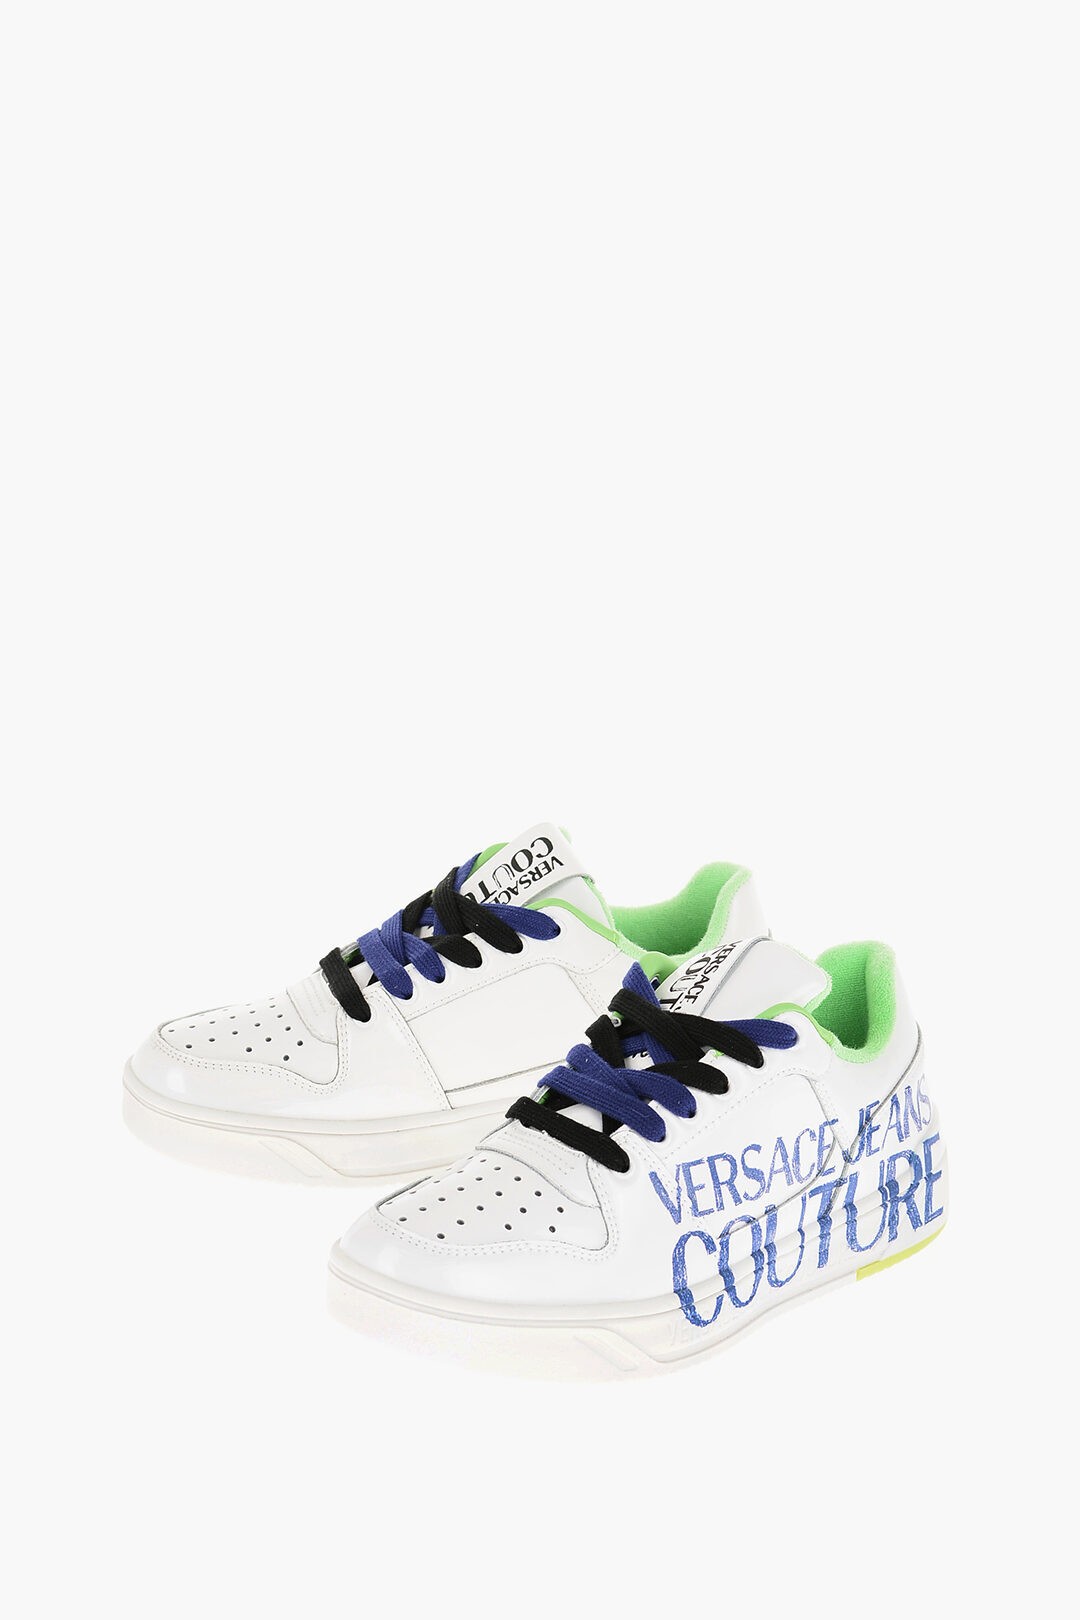 VERSACE ヴェルサーチ スニーカー 74YA3SJ5 ZP224 PV5 メンズ JEANS COUTURE PATENT LEATHER STARLIGHT SNEAKERS WITH PRINTED 【関税・送料無料】【ラッピング無料】 dk